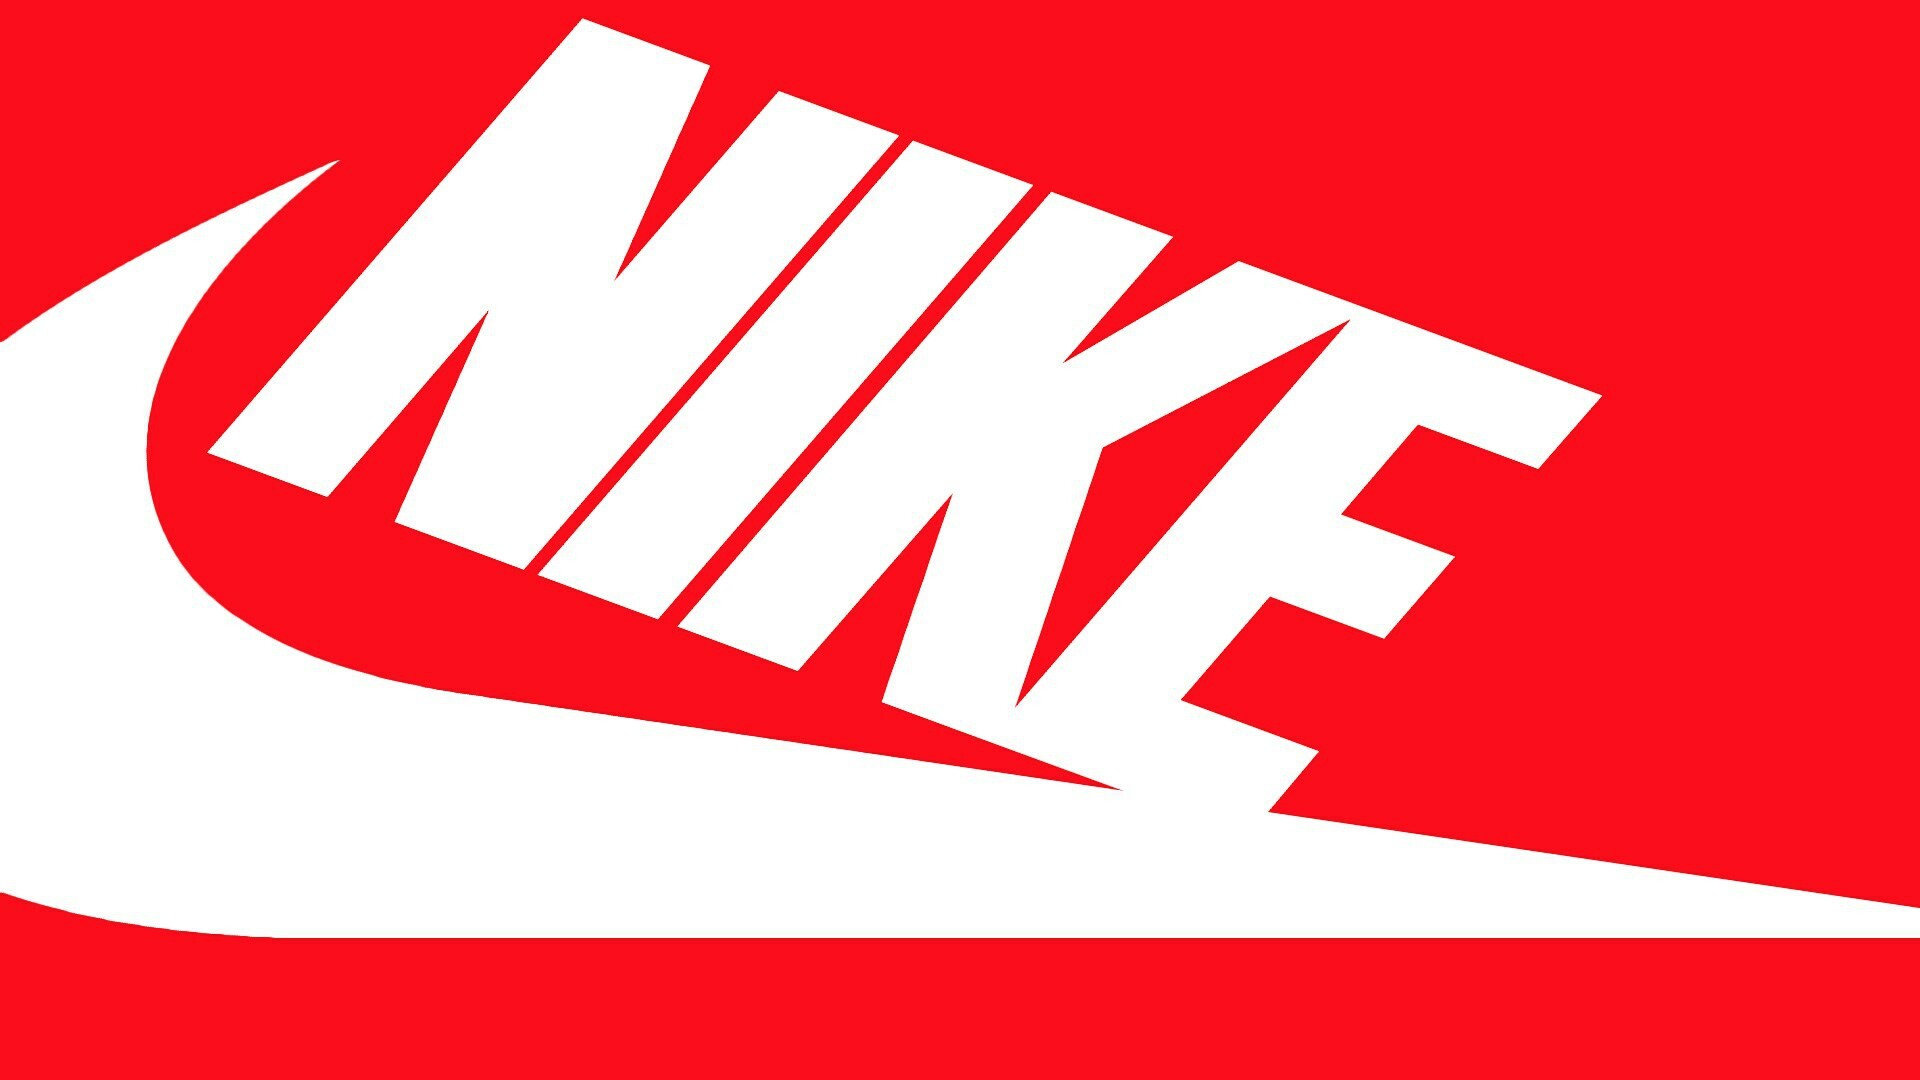 Nike: The world's largest athletic footwear and apparel company, Blue Ribbon Sports. 1920x1080 Full HD Background.